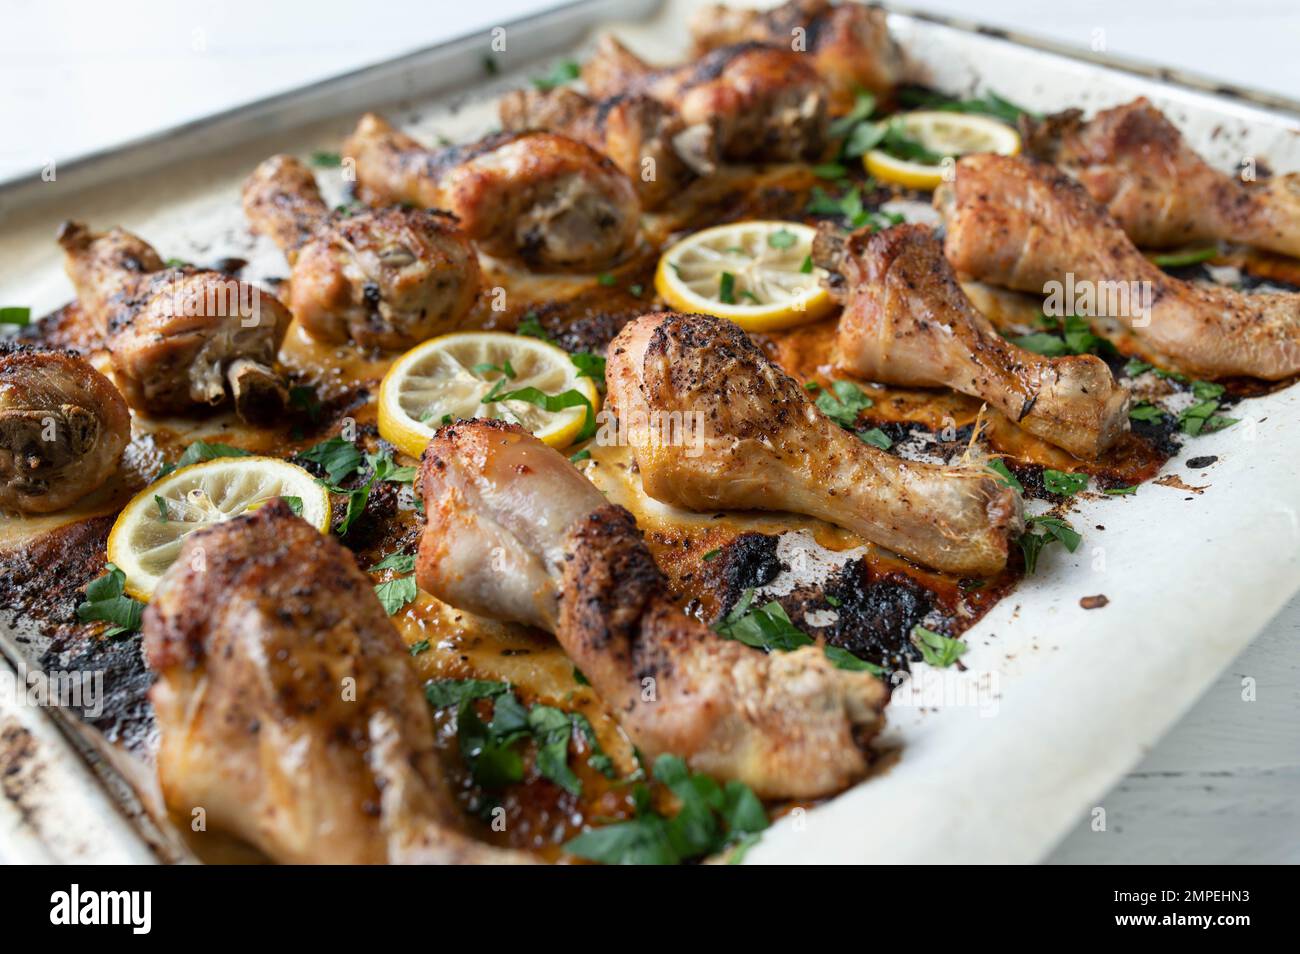 Chicken drumsticks oven baked with lemon and herbs on a baking sheet Stock Photo